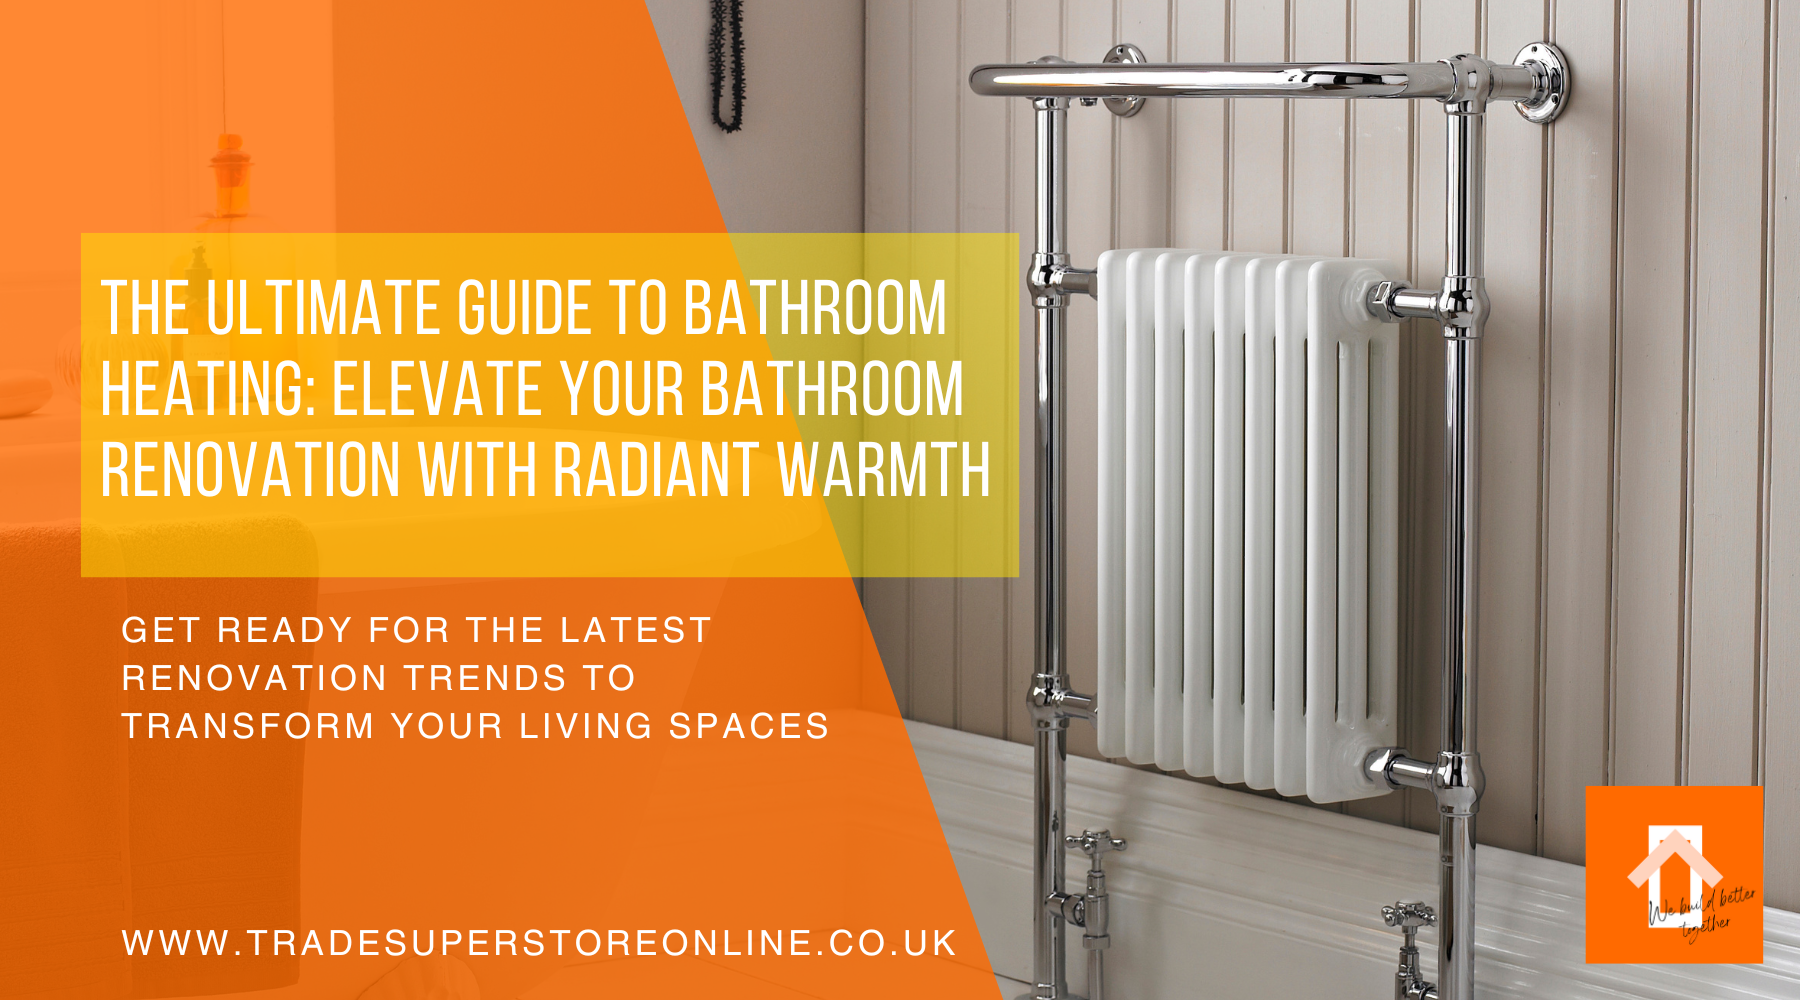 The Ultimate Guide to Bathroom Heating: Elevate Your Bathroom Renovation with Radiant Warmth